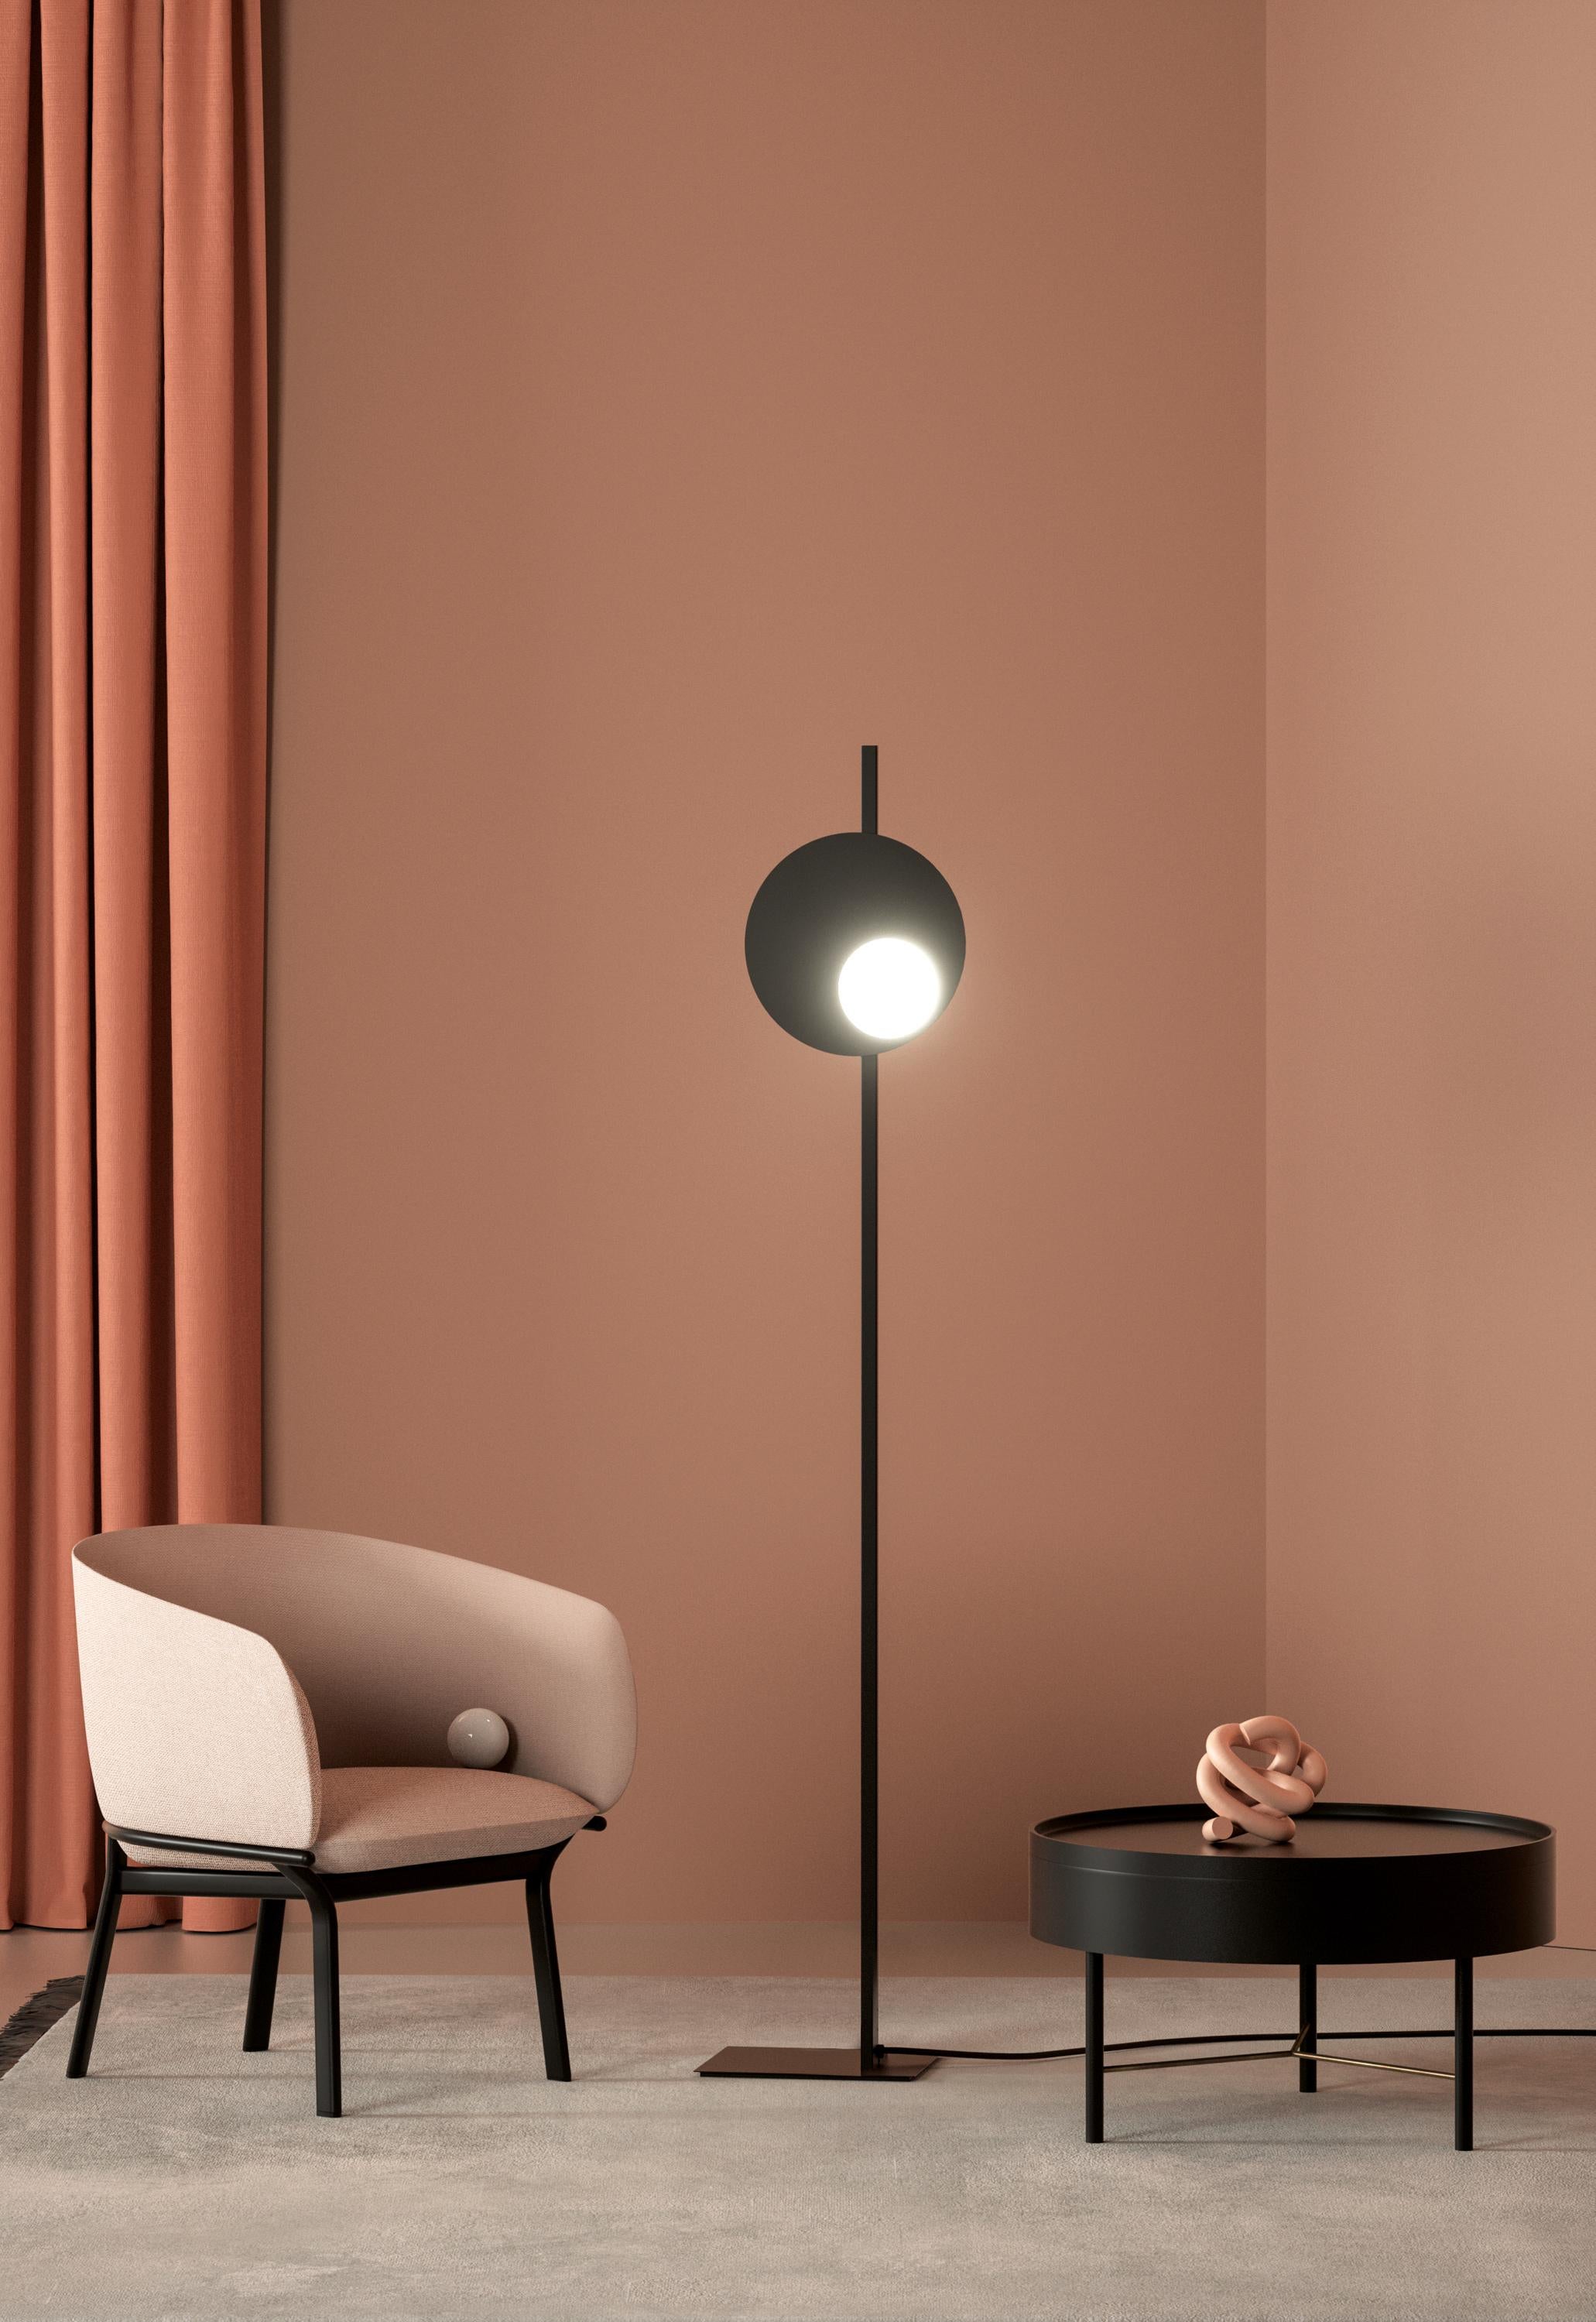 Axolight Kwic 36 Medium Floor Lamp in Intense Black by Serge & Robert Cornelissen

Kwic is a lively expression of graphic geometry, dynamism and refinement. Its asymmetrical lines are like elusive droplets that play with highly intense, luminous